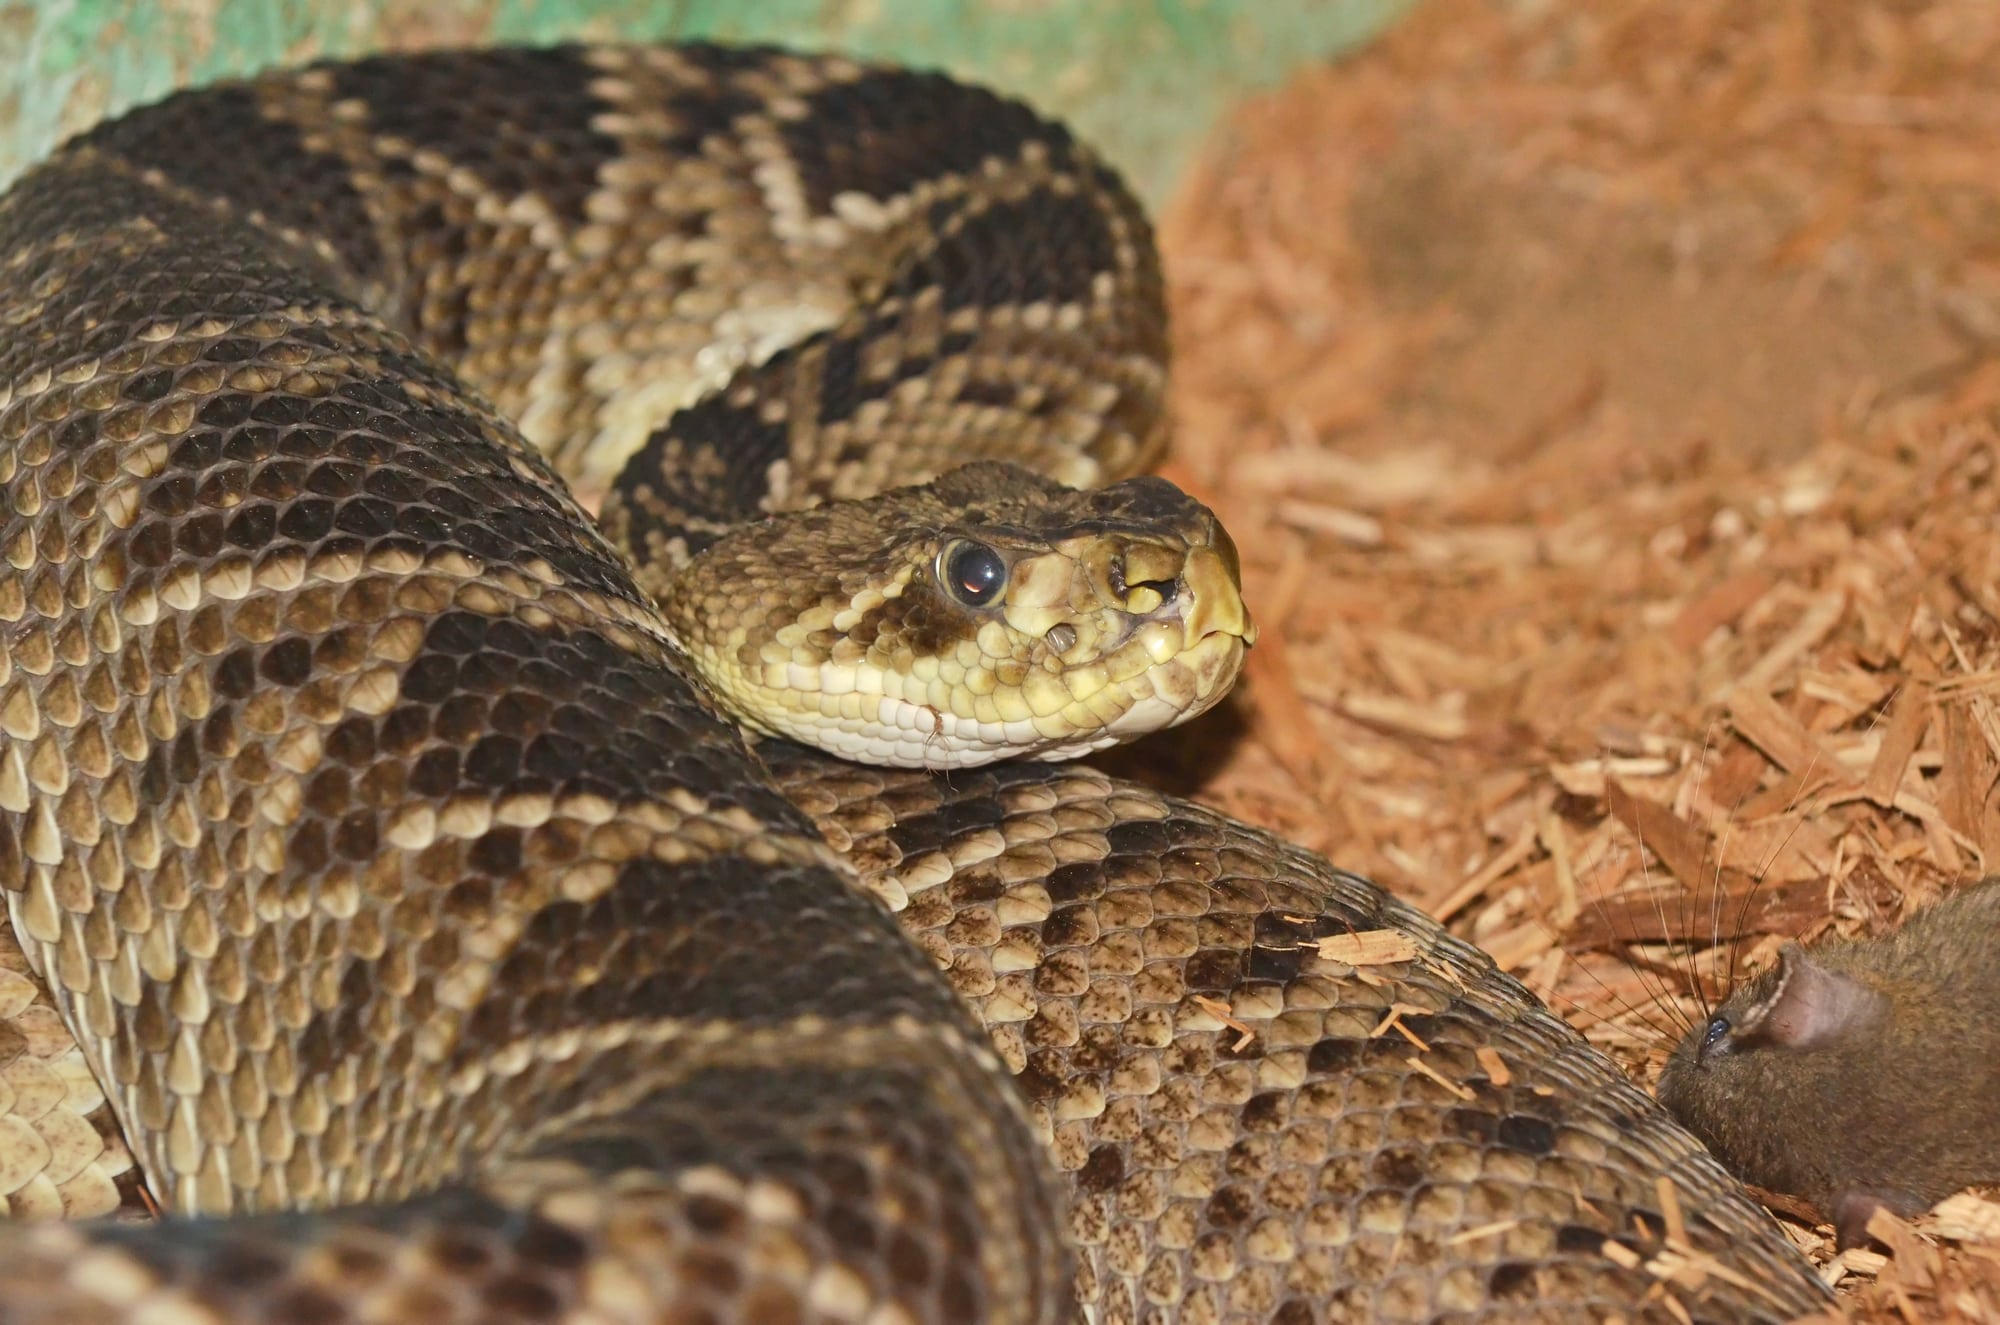 Diamondback rattle snake coiled next to a dead rat